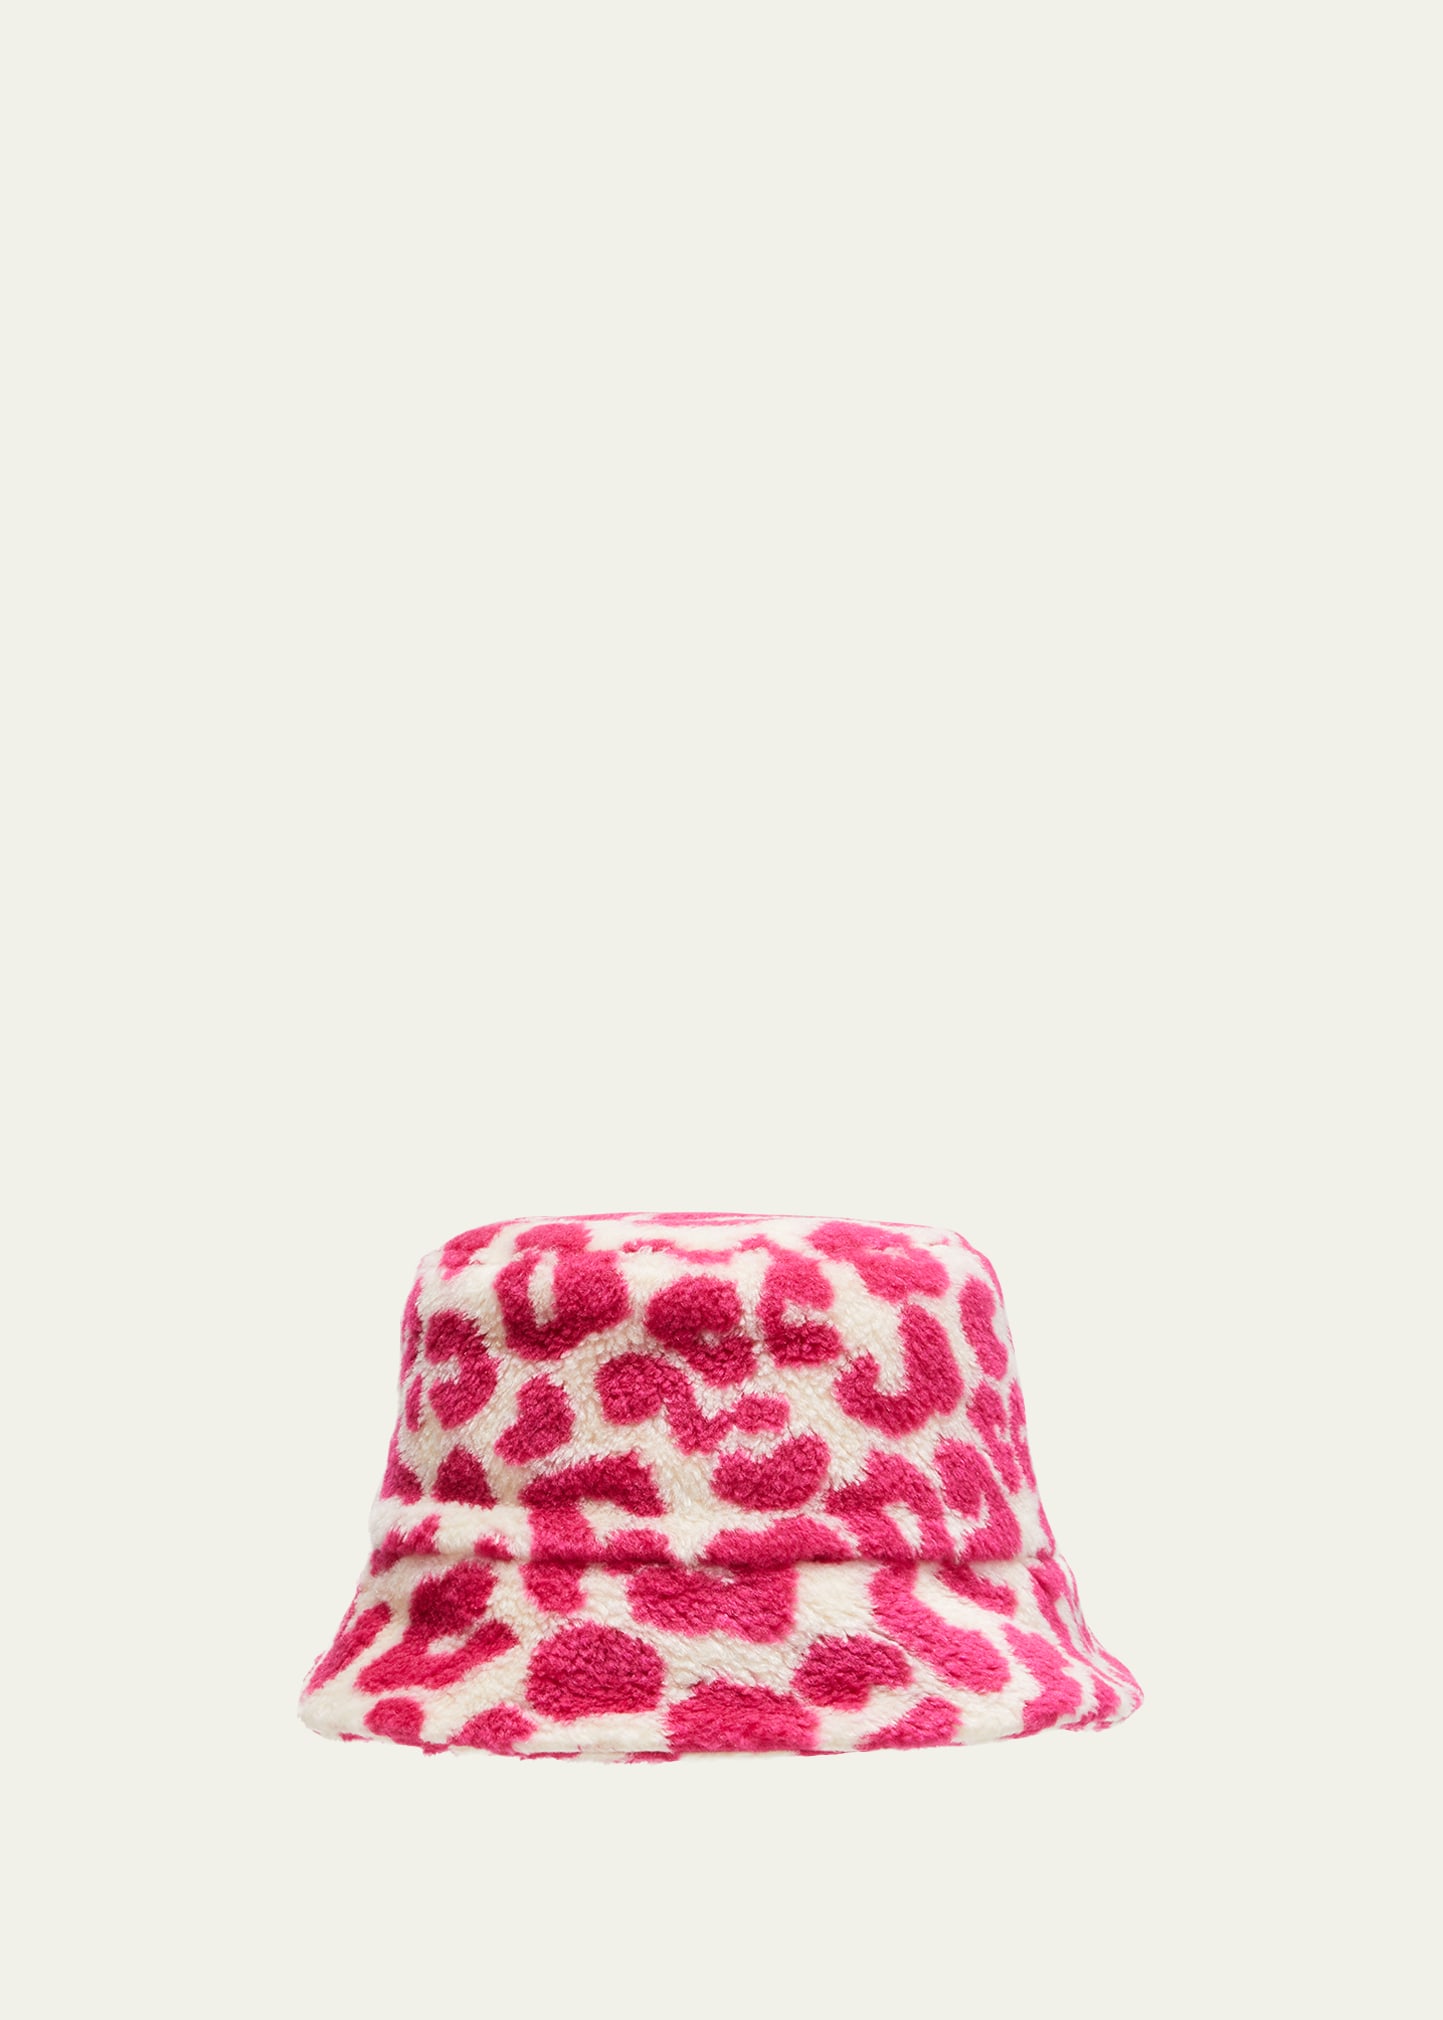 Moncler Genius X Jw Anderson Cheetah-print Bucket Hat With Logo Detail In 500 Pink Leopard